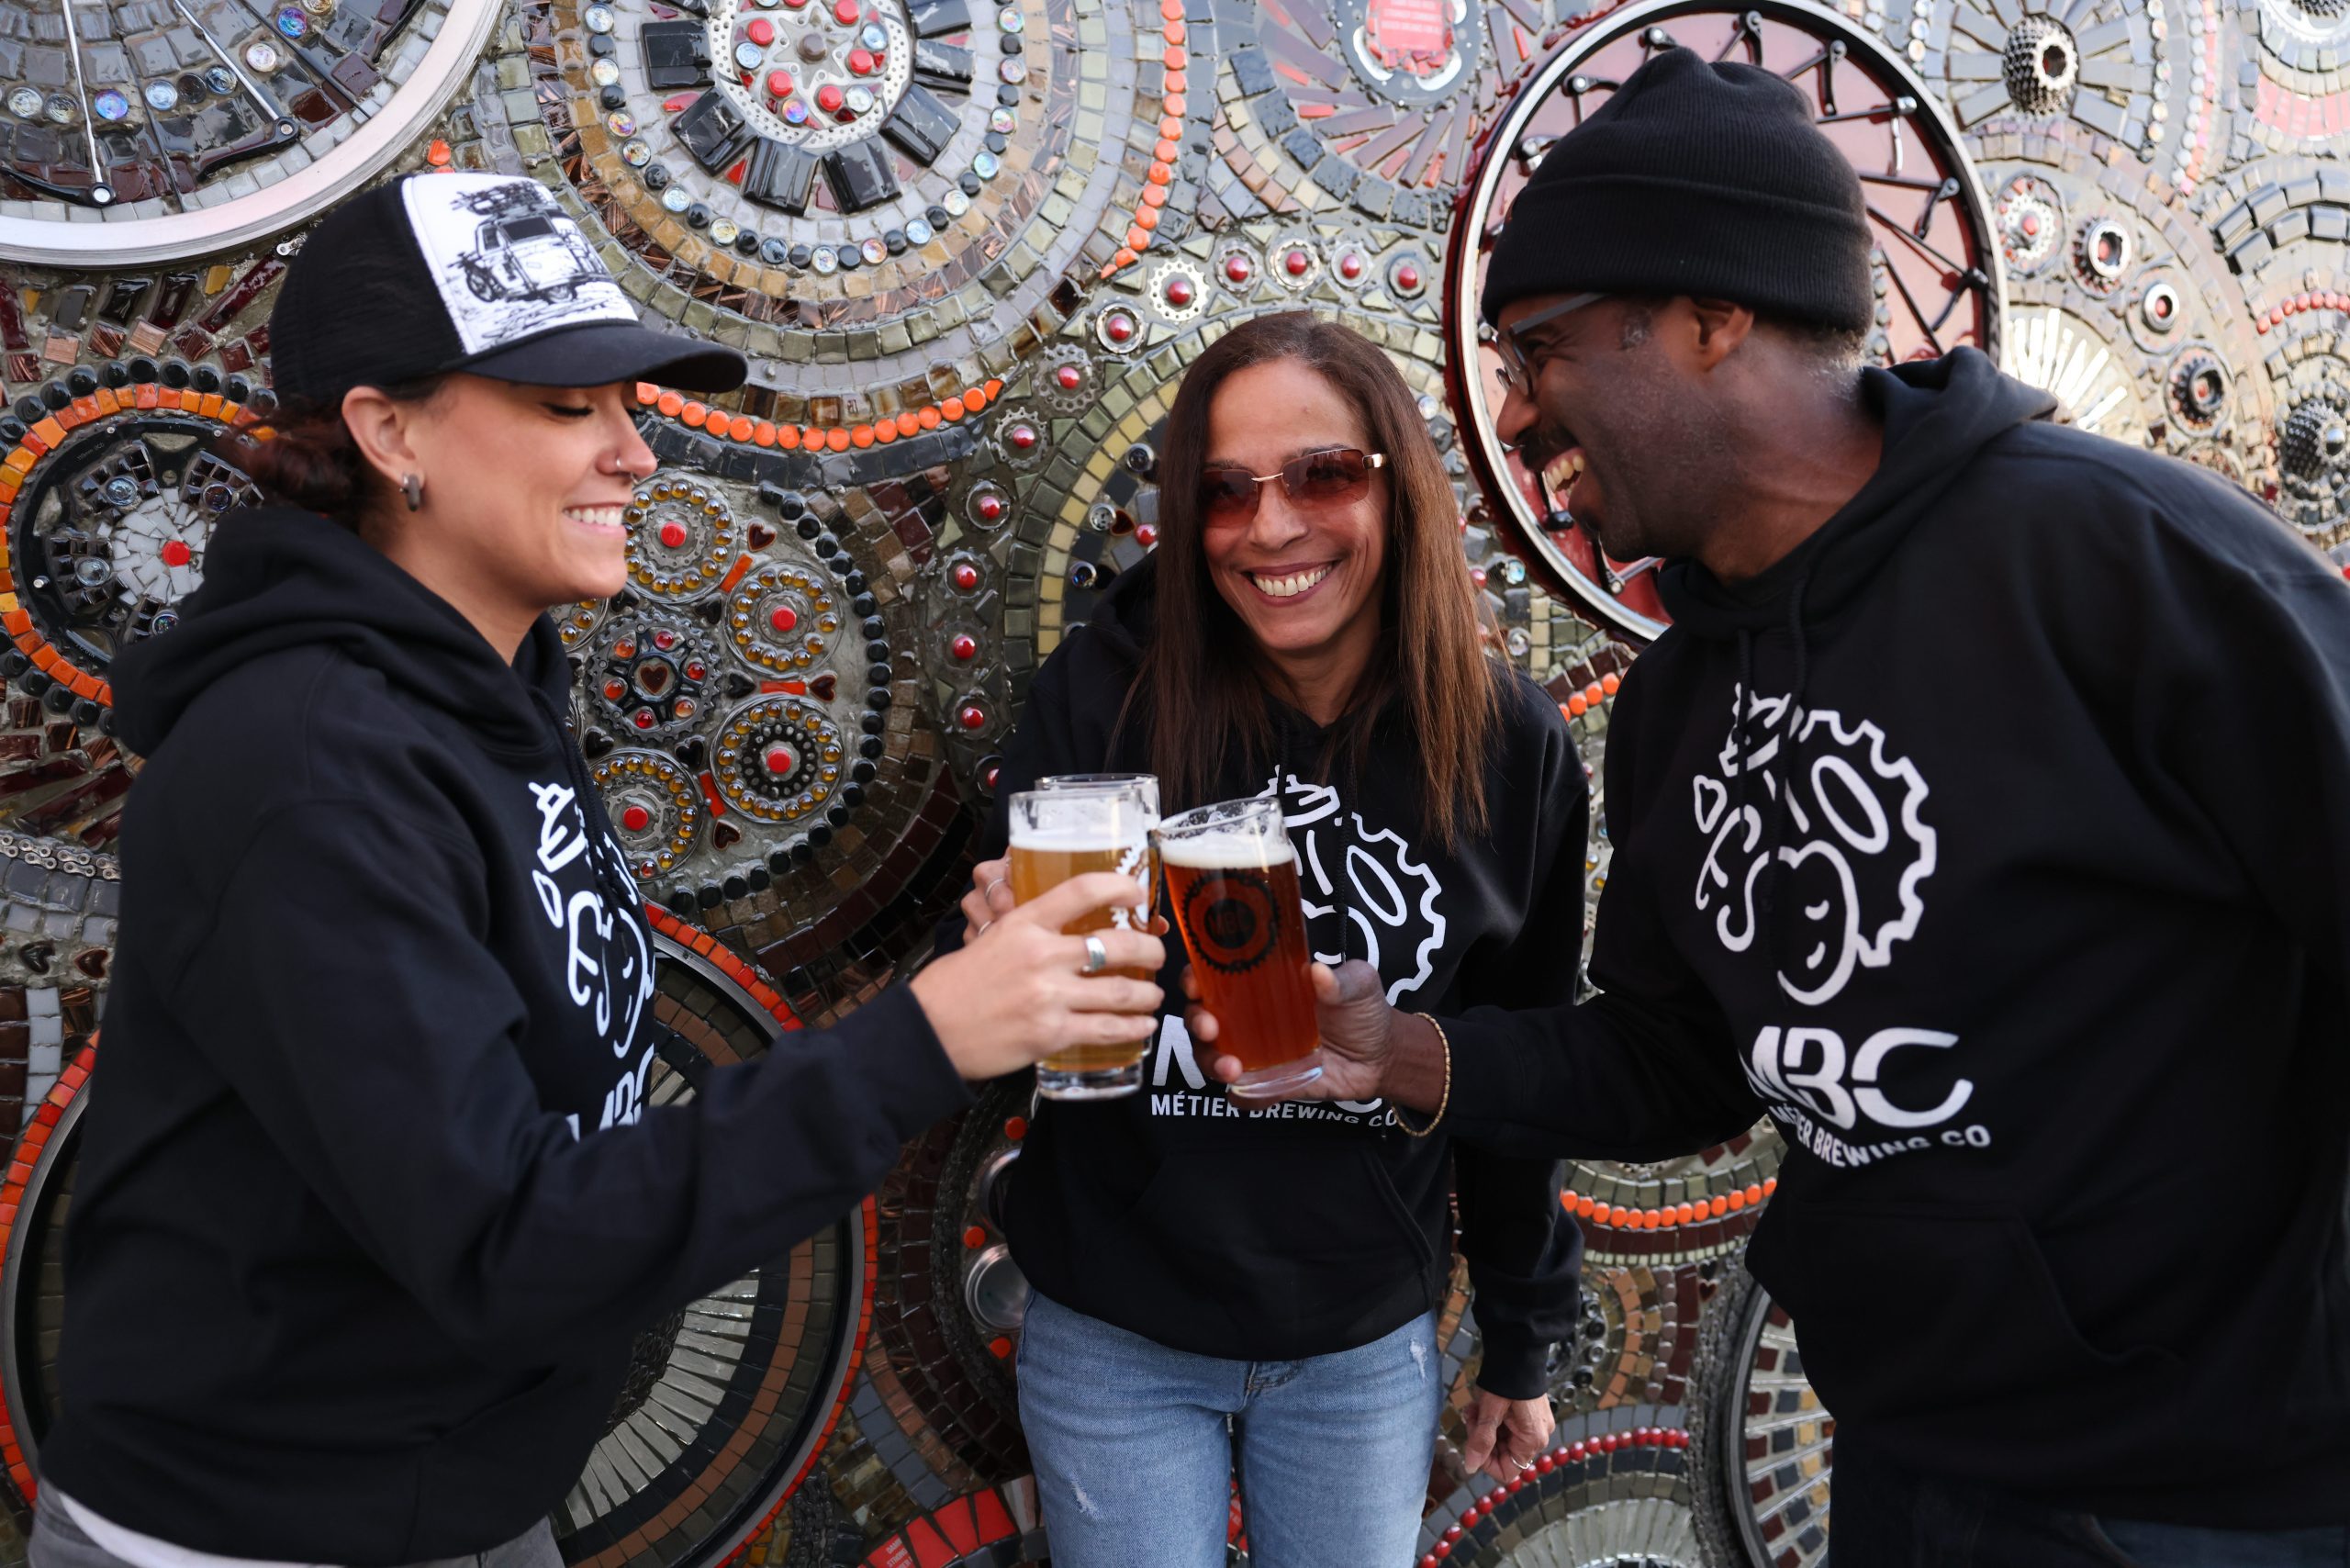 Three people smiling and clinking their beers together all wearing Metier sweatshirts.